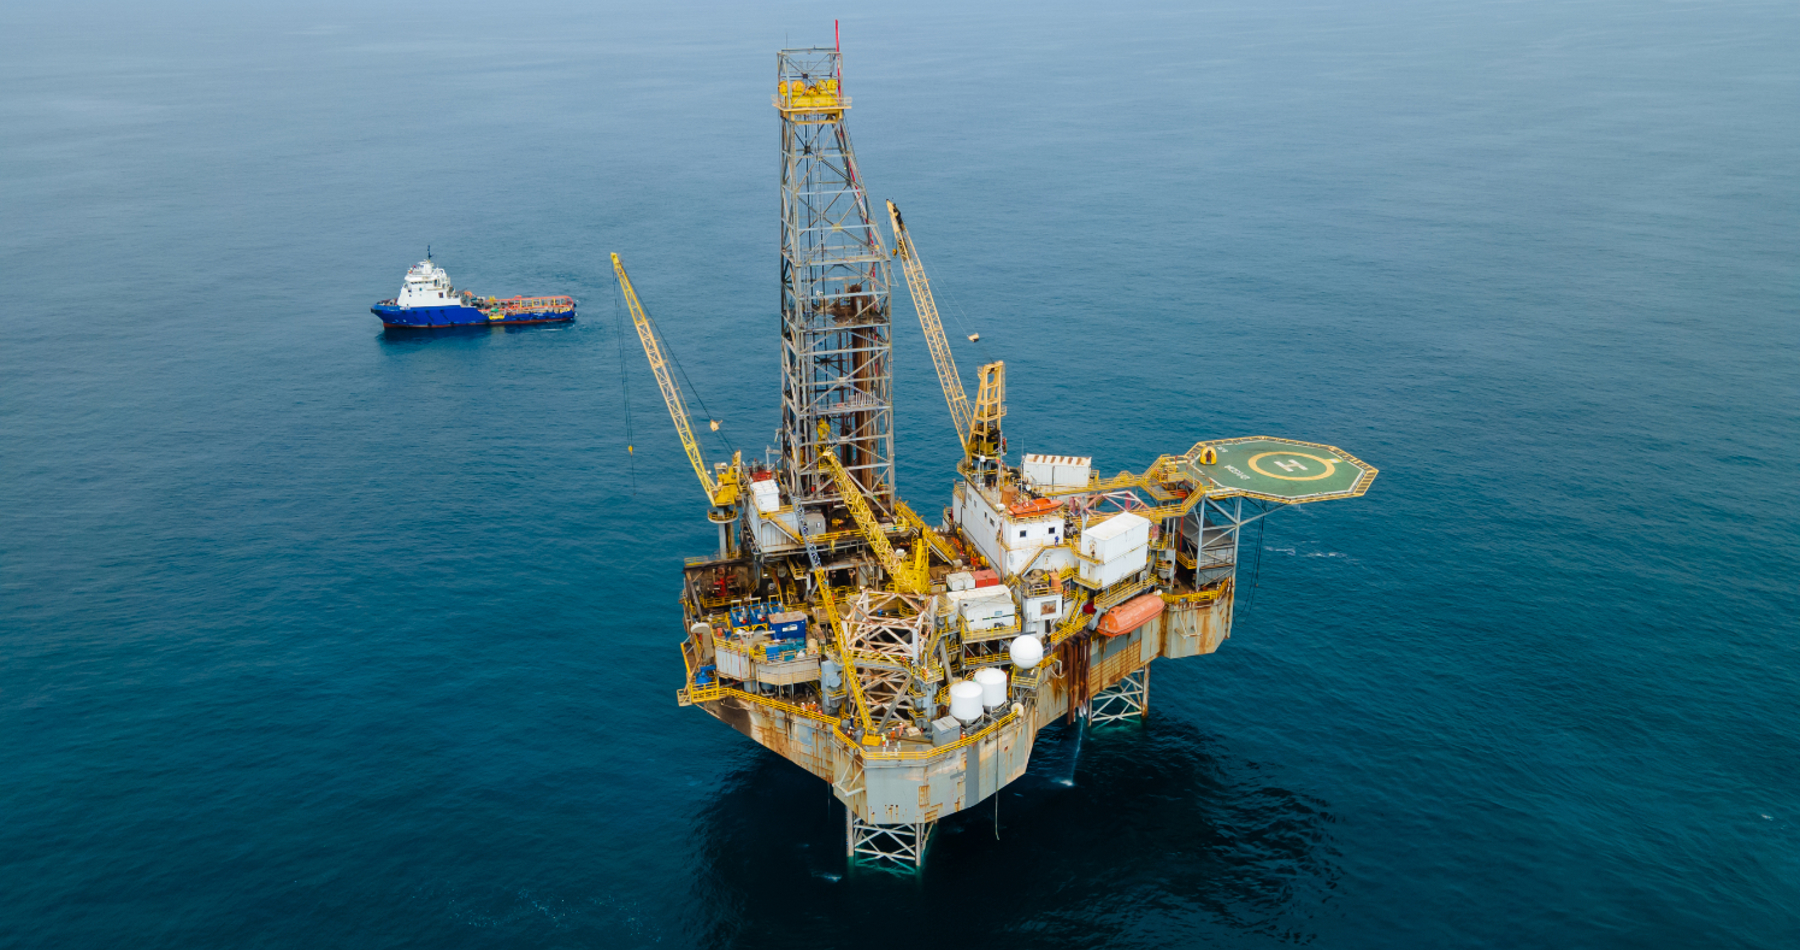 Wagenborg Foxdrill secures contract for Congo offshore derrick removal